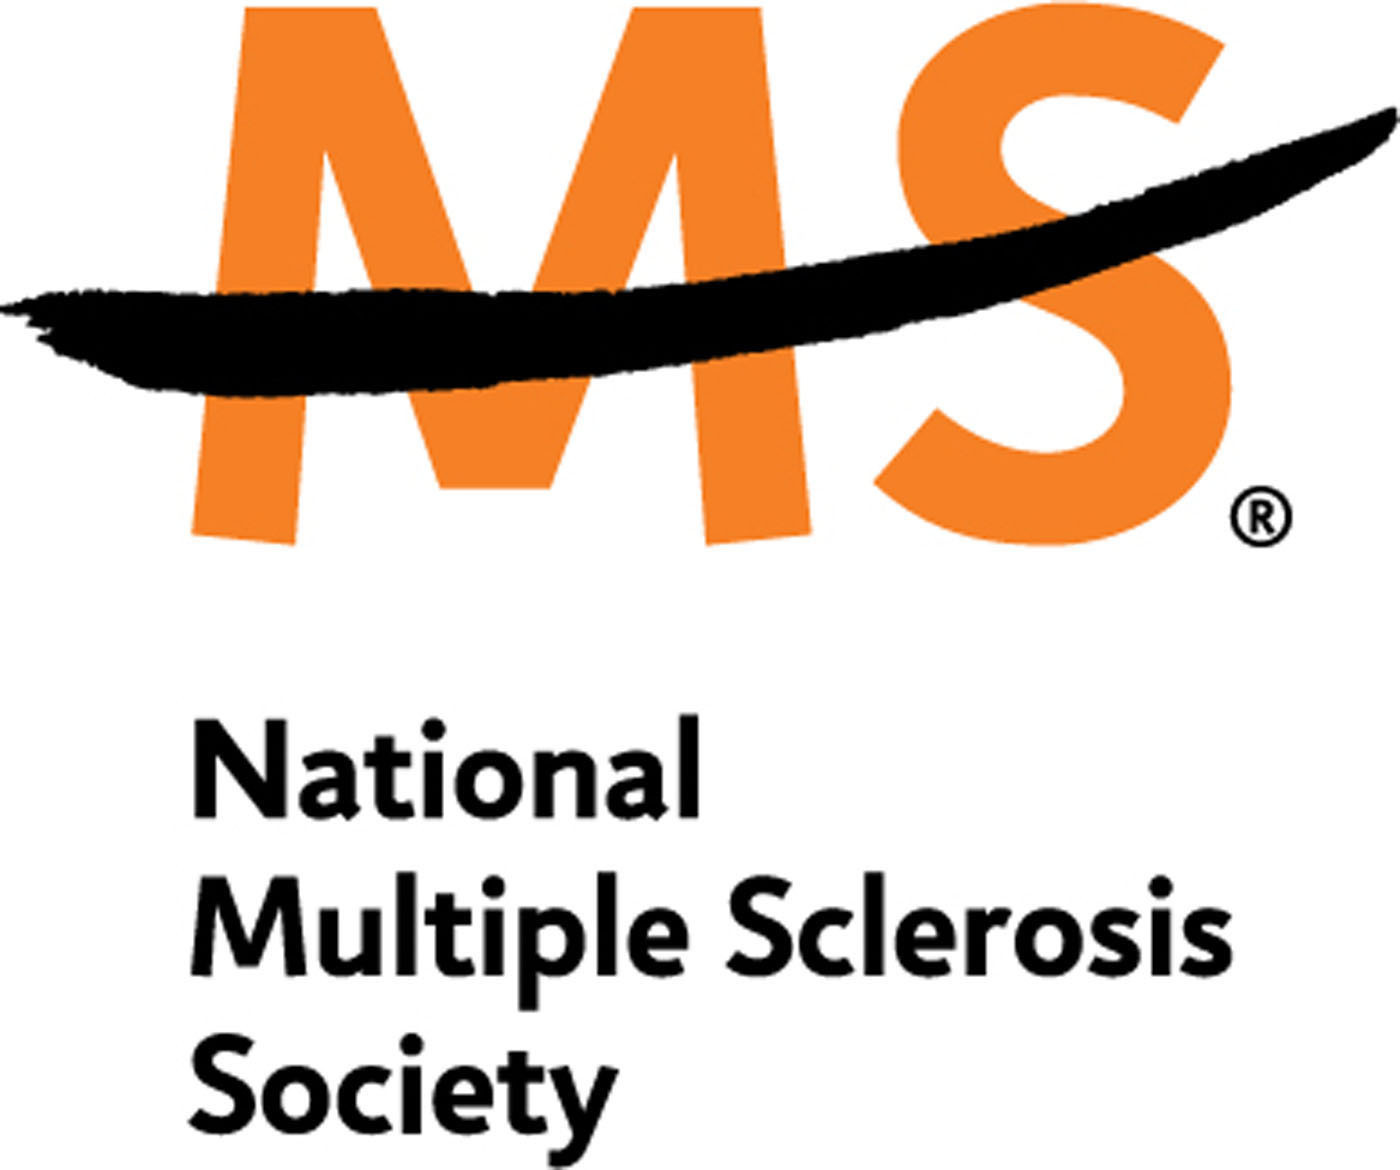 New Study Confirms Multiple Sclerosis Prevalence in the US is Nearly 1